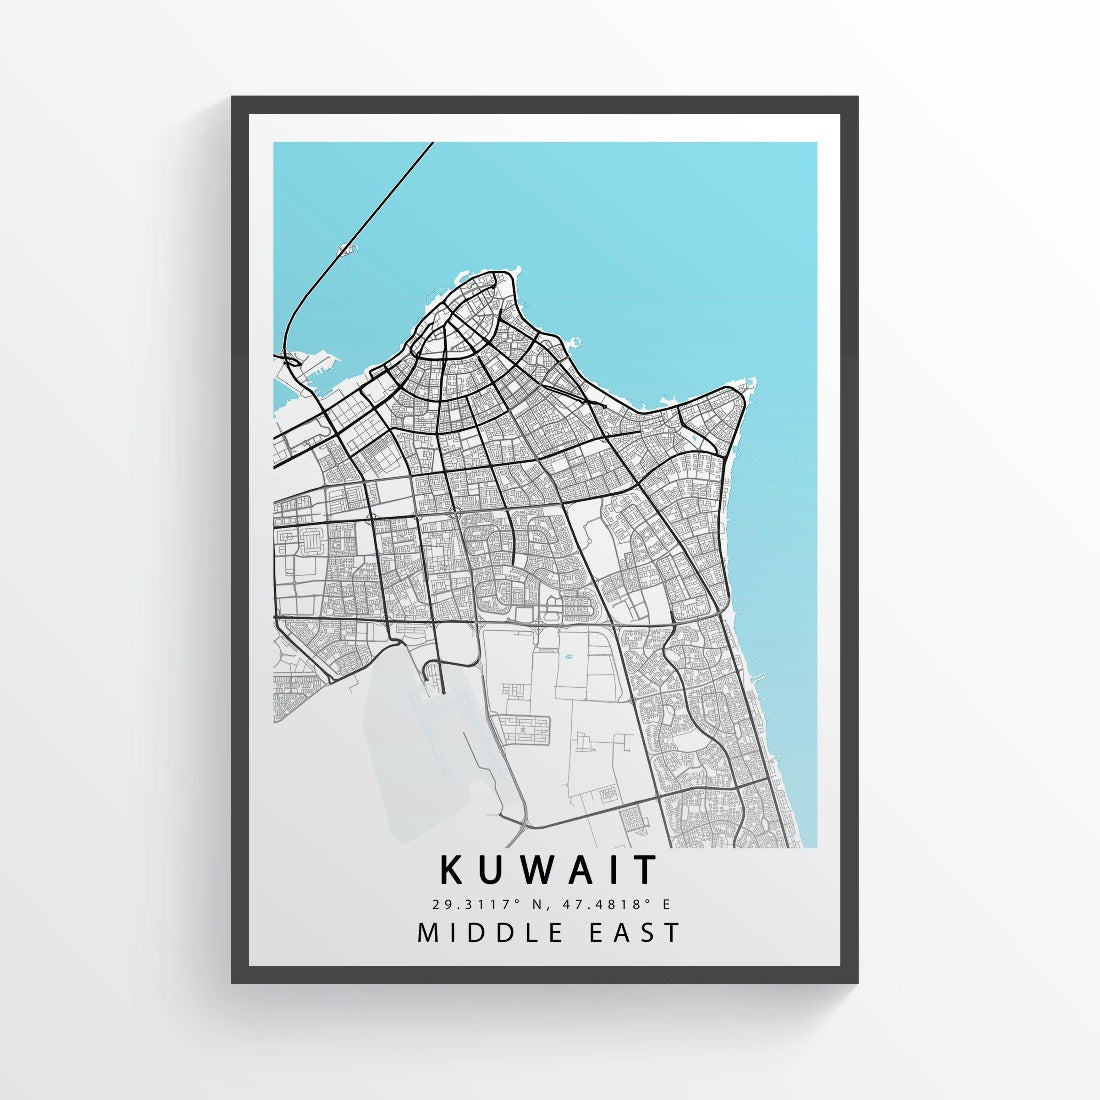 Ready to get lost in the beauty of Kuwait City? This stunning street map print from 98Types Maps is the perfect addition to your home or office. With intricate detail and creative design, this map print is perfect for anyone who loves Kuwait City or wants to explore it in a new way. Plus, it makes a great gift for anyone who loves to travel or is planning a trip to Kuwait City.